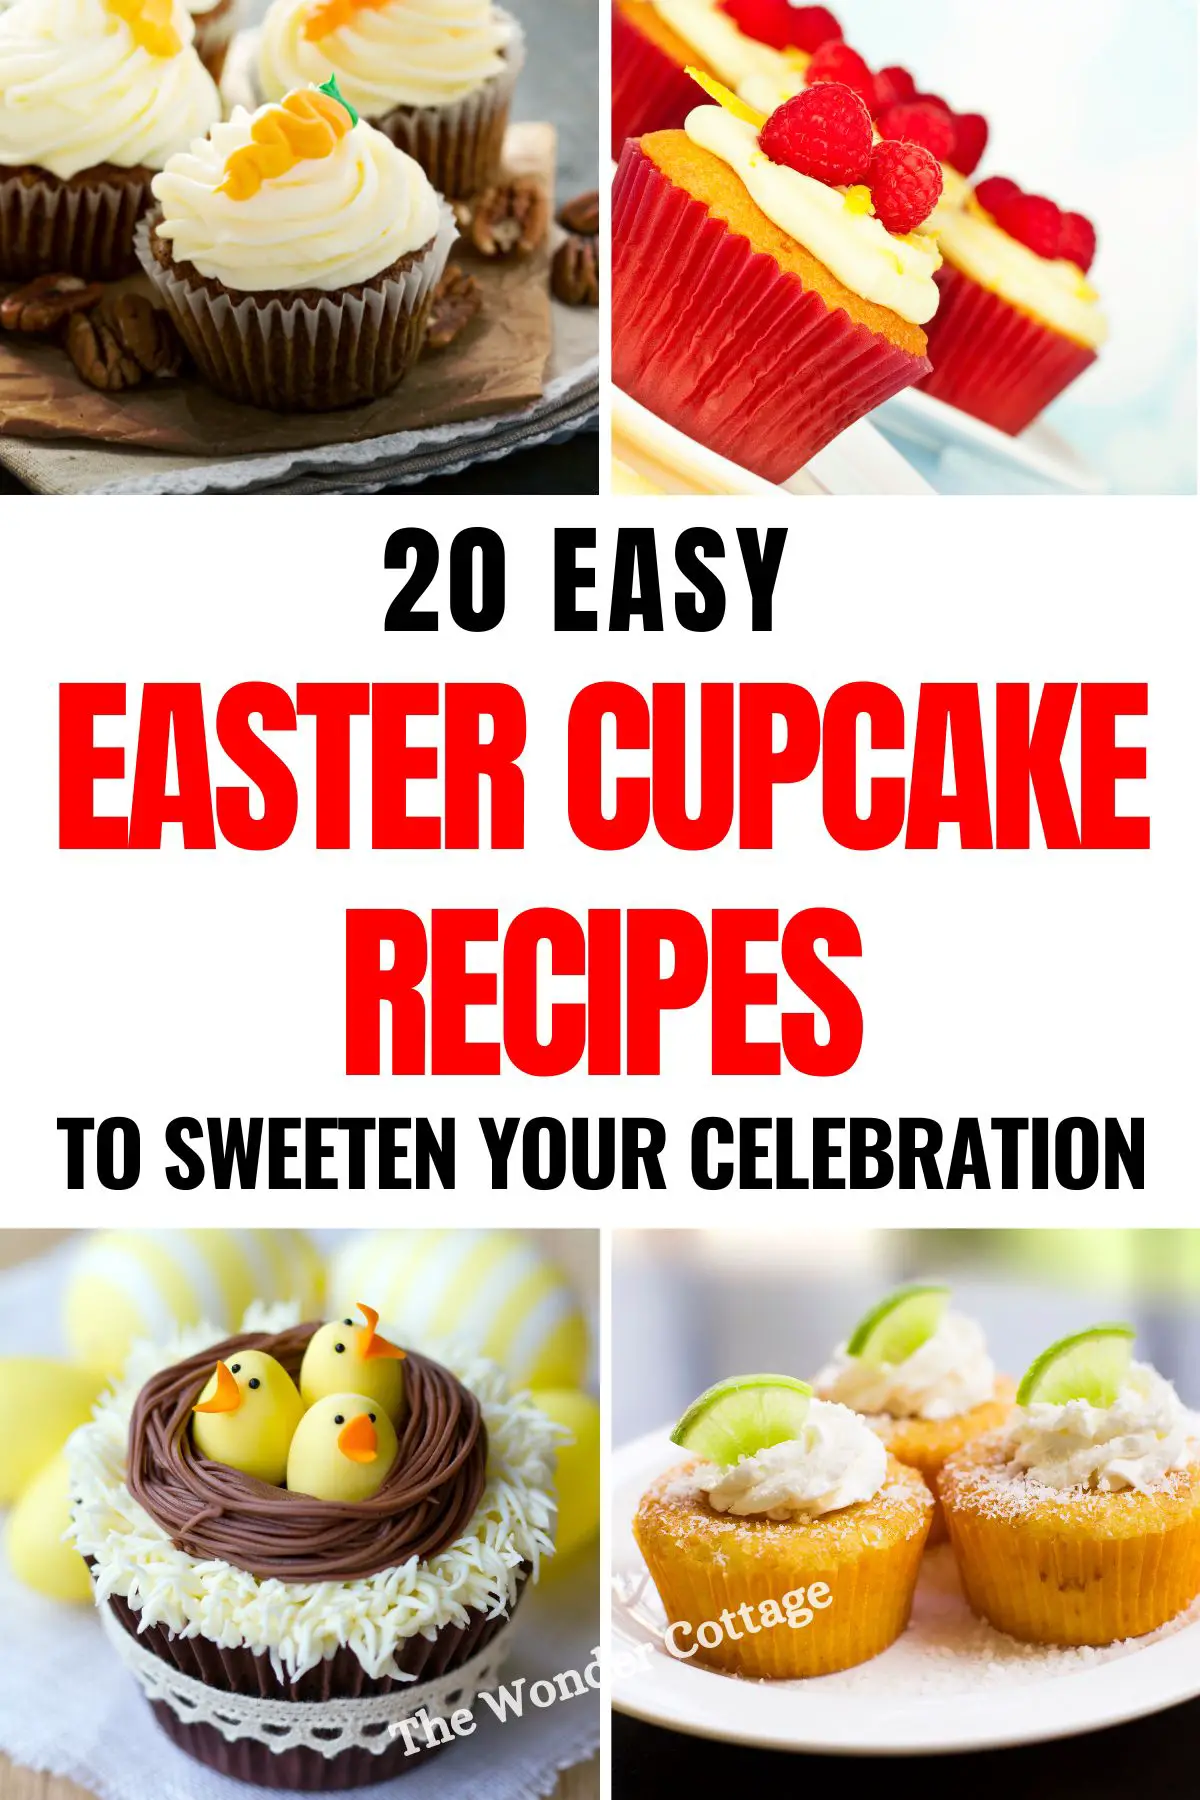 20 Easy Easter Cupcake Recipes To Sweeten Your Celebration